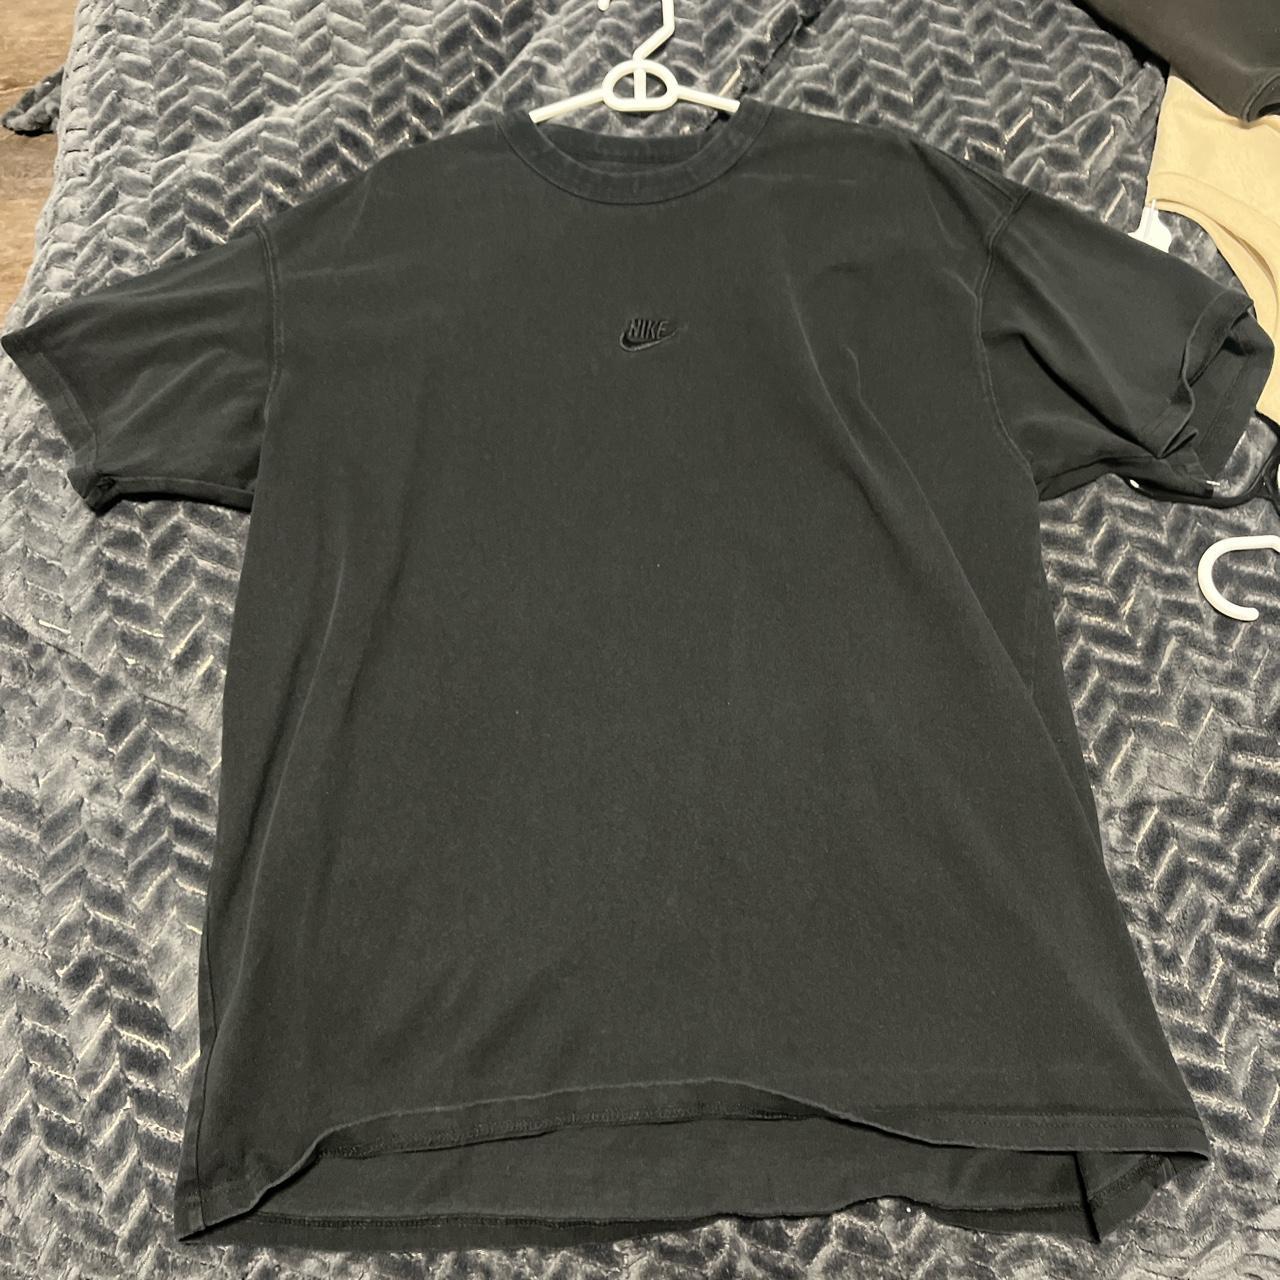 Brand new Nike shirt size extra large loose fit - Depop